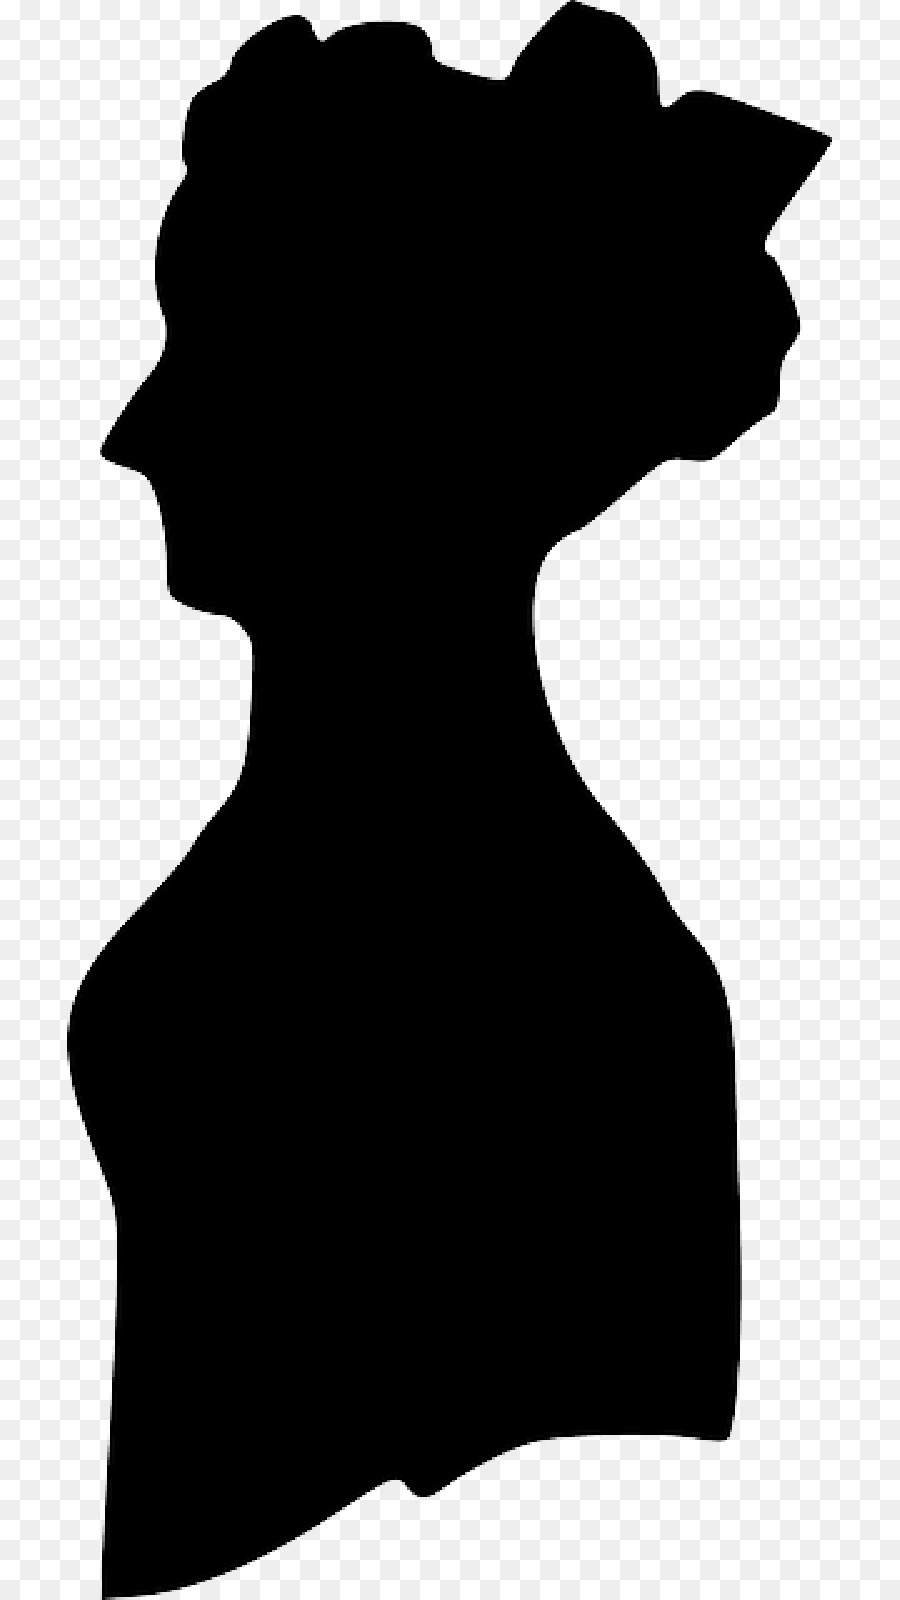 Silhouette Vector graphics Woman Clip art Drawing - sillhouette png download - 800*1600 - Free Transparent Silhouette png Download.